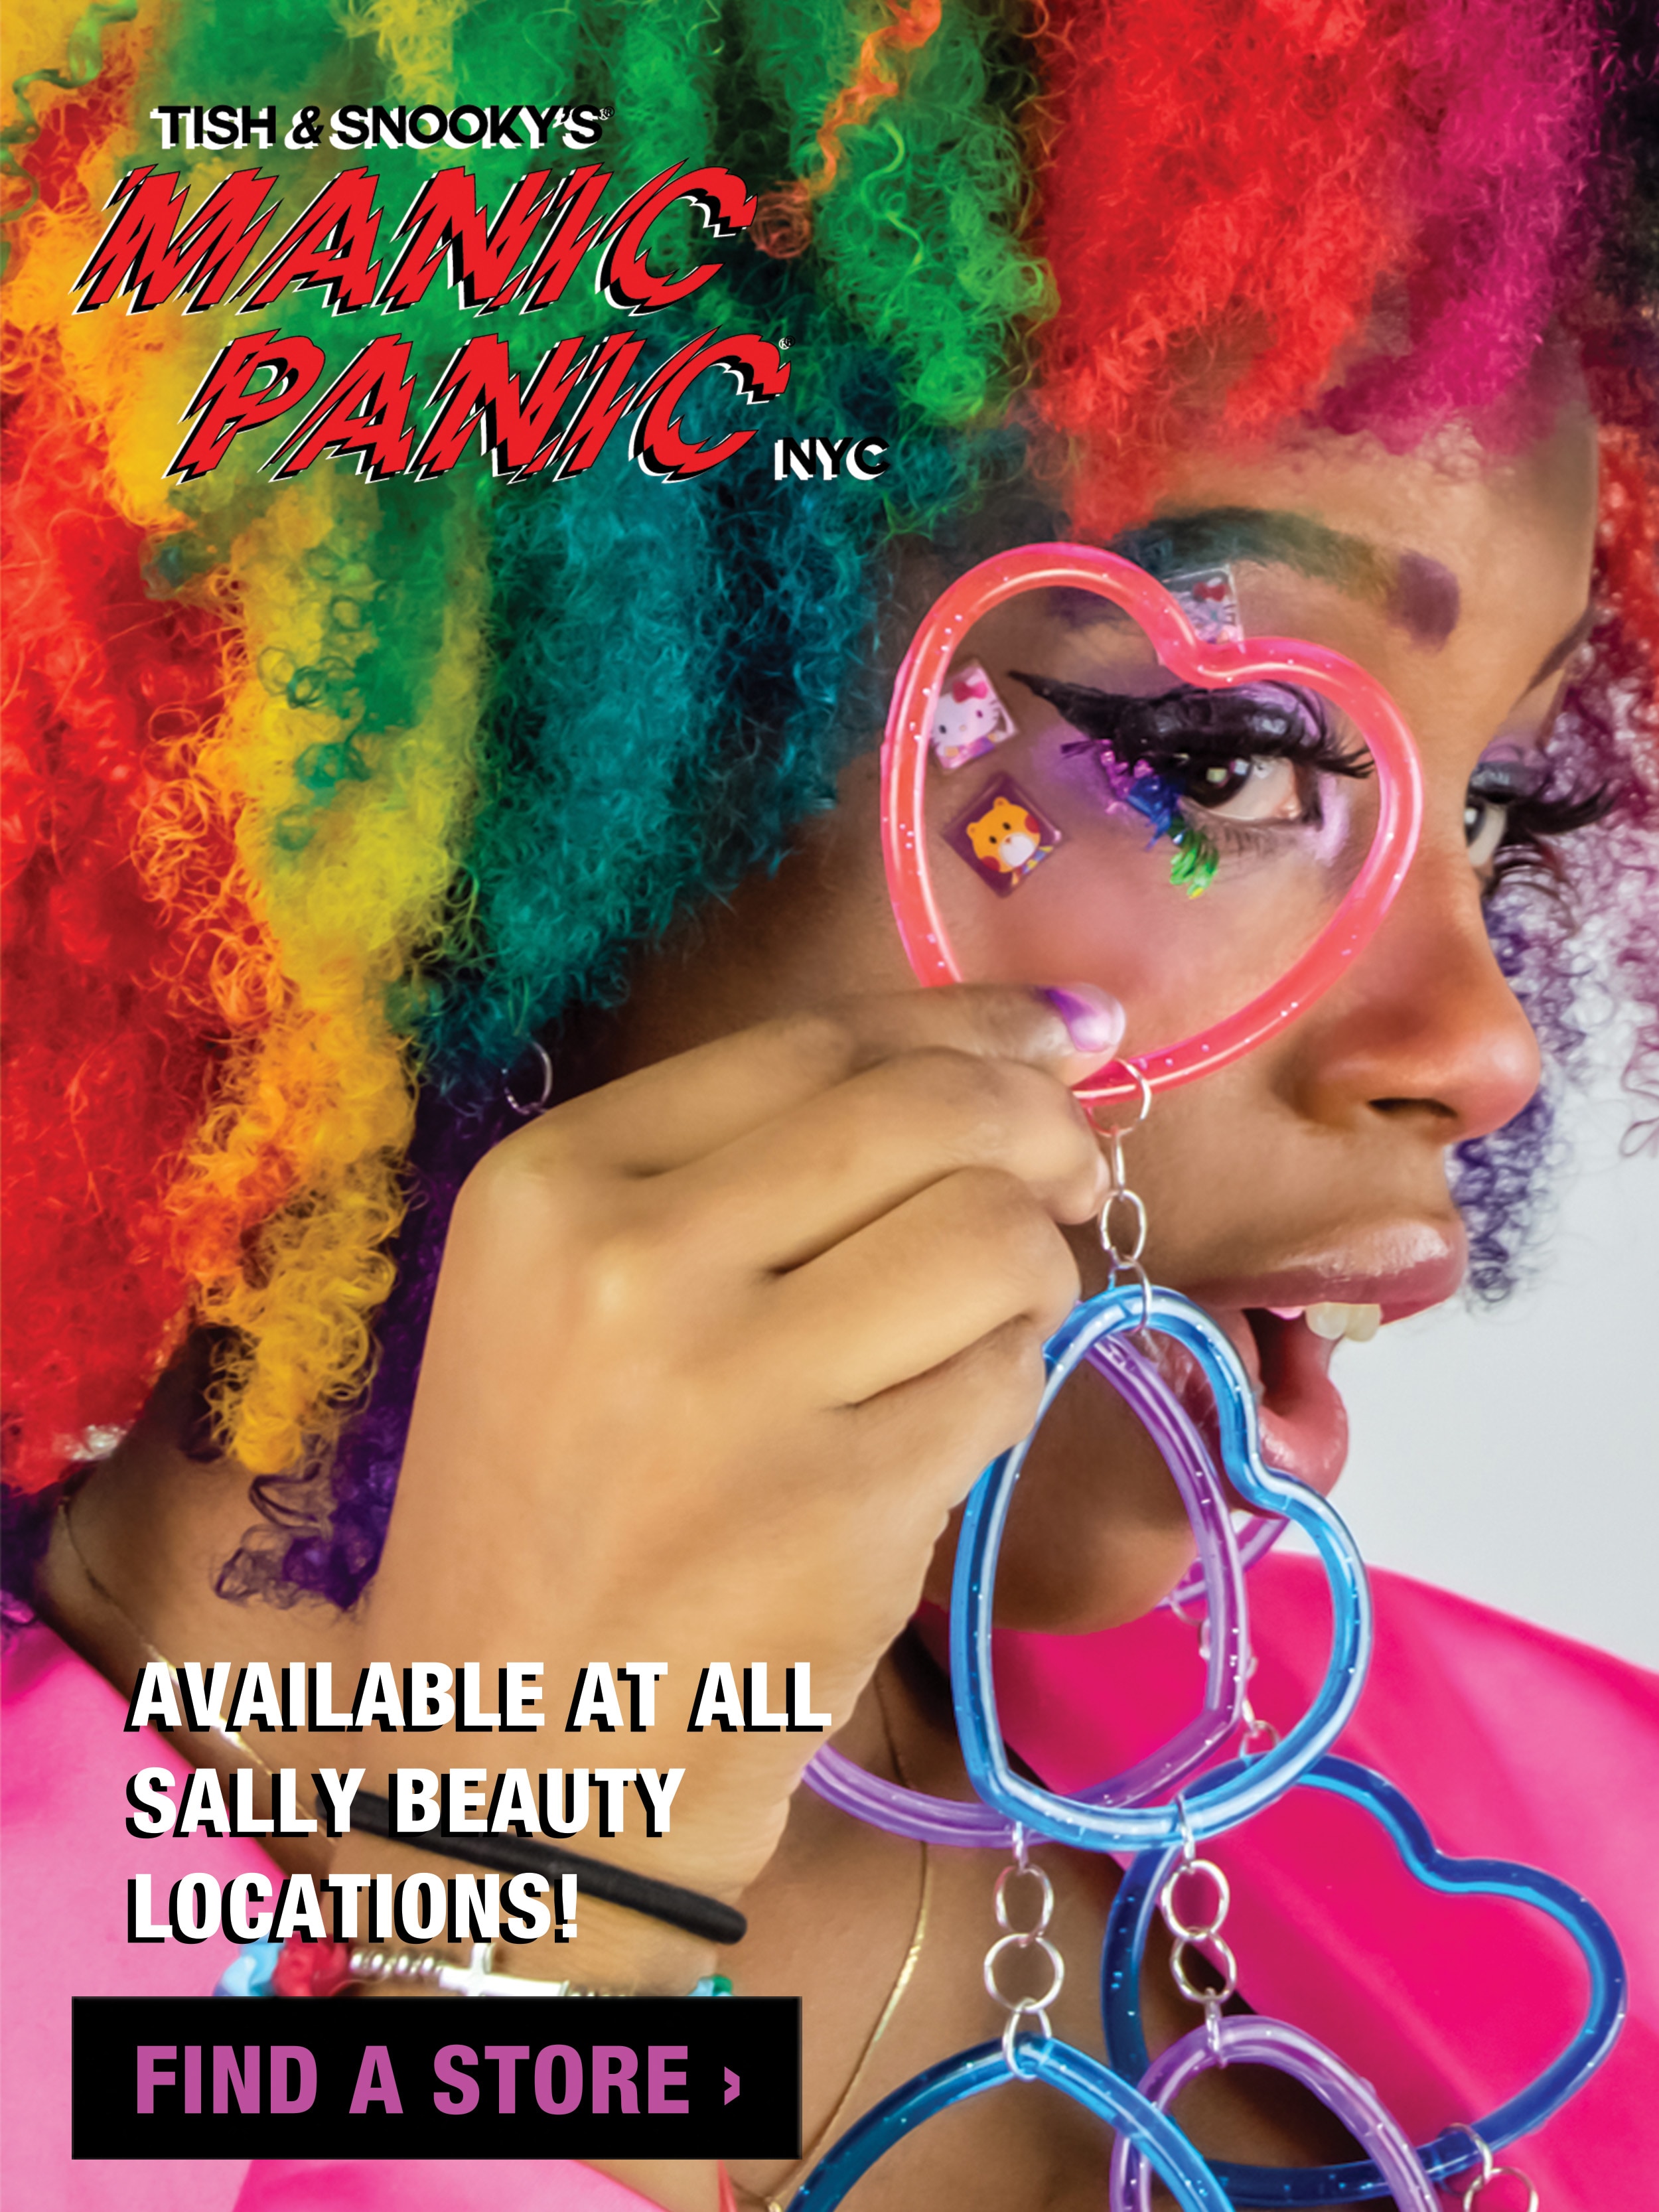 Now available at all Sally Beauty locations. Find a store.